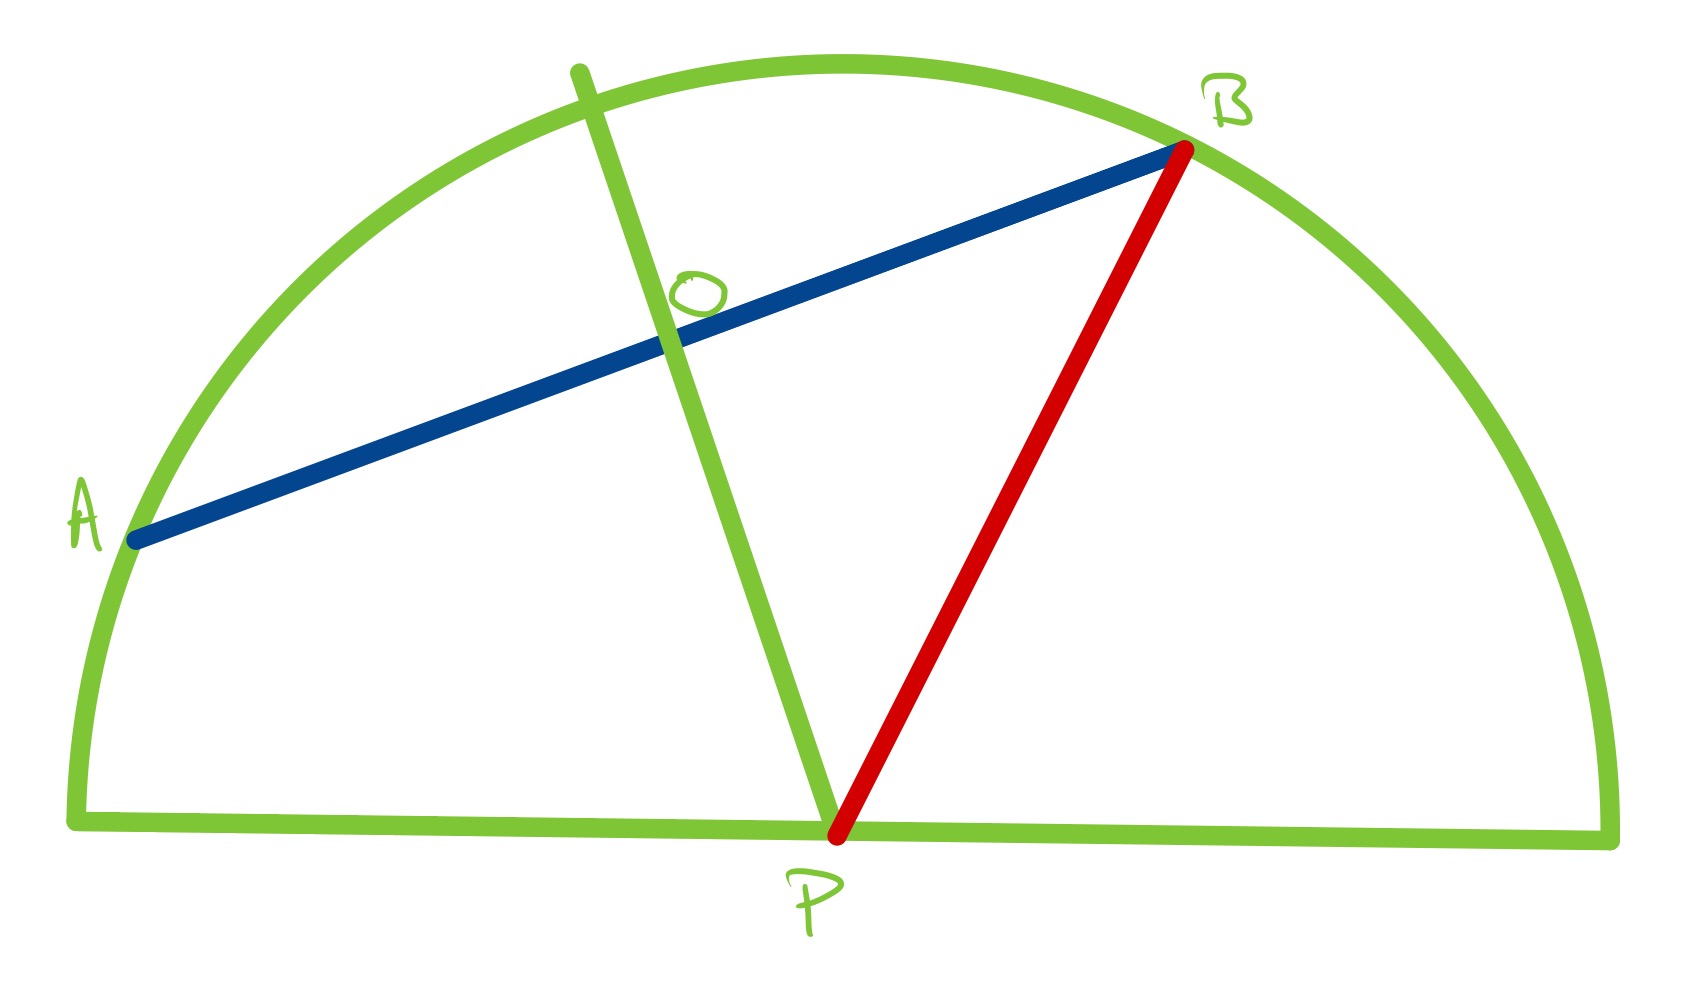 Two overlapping semi-circles simplified